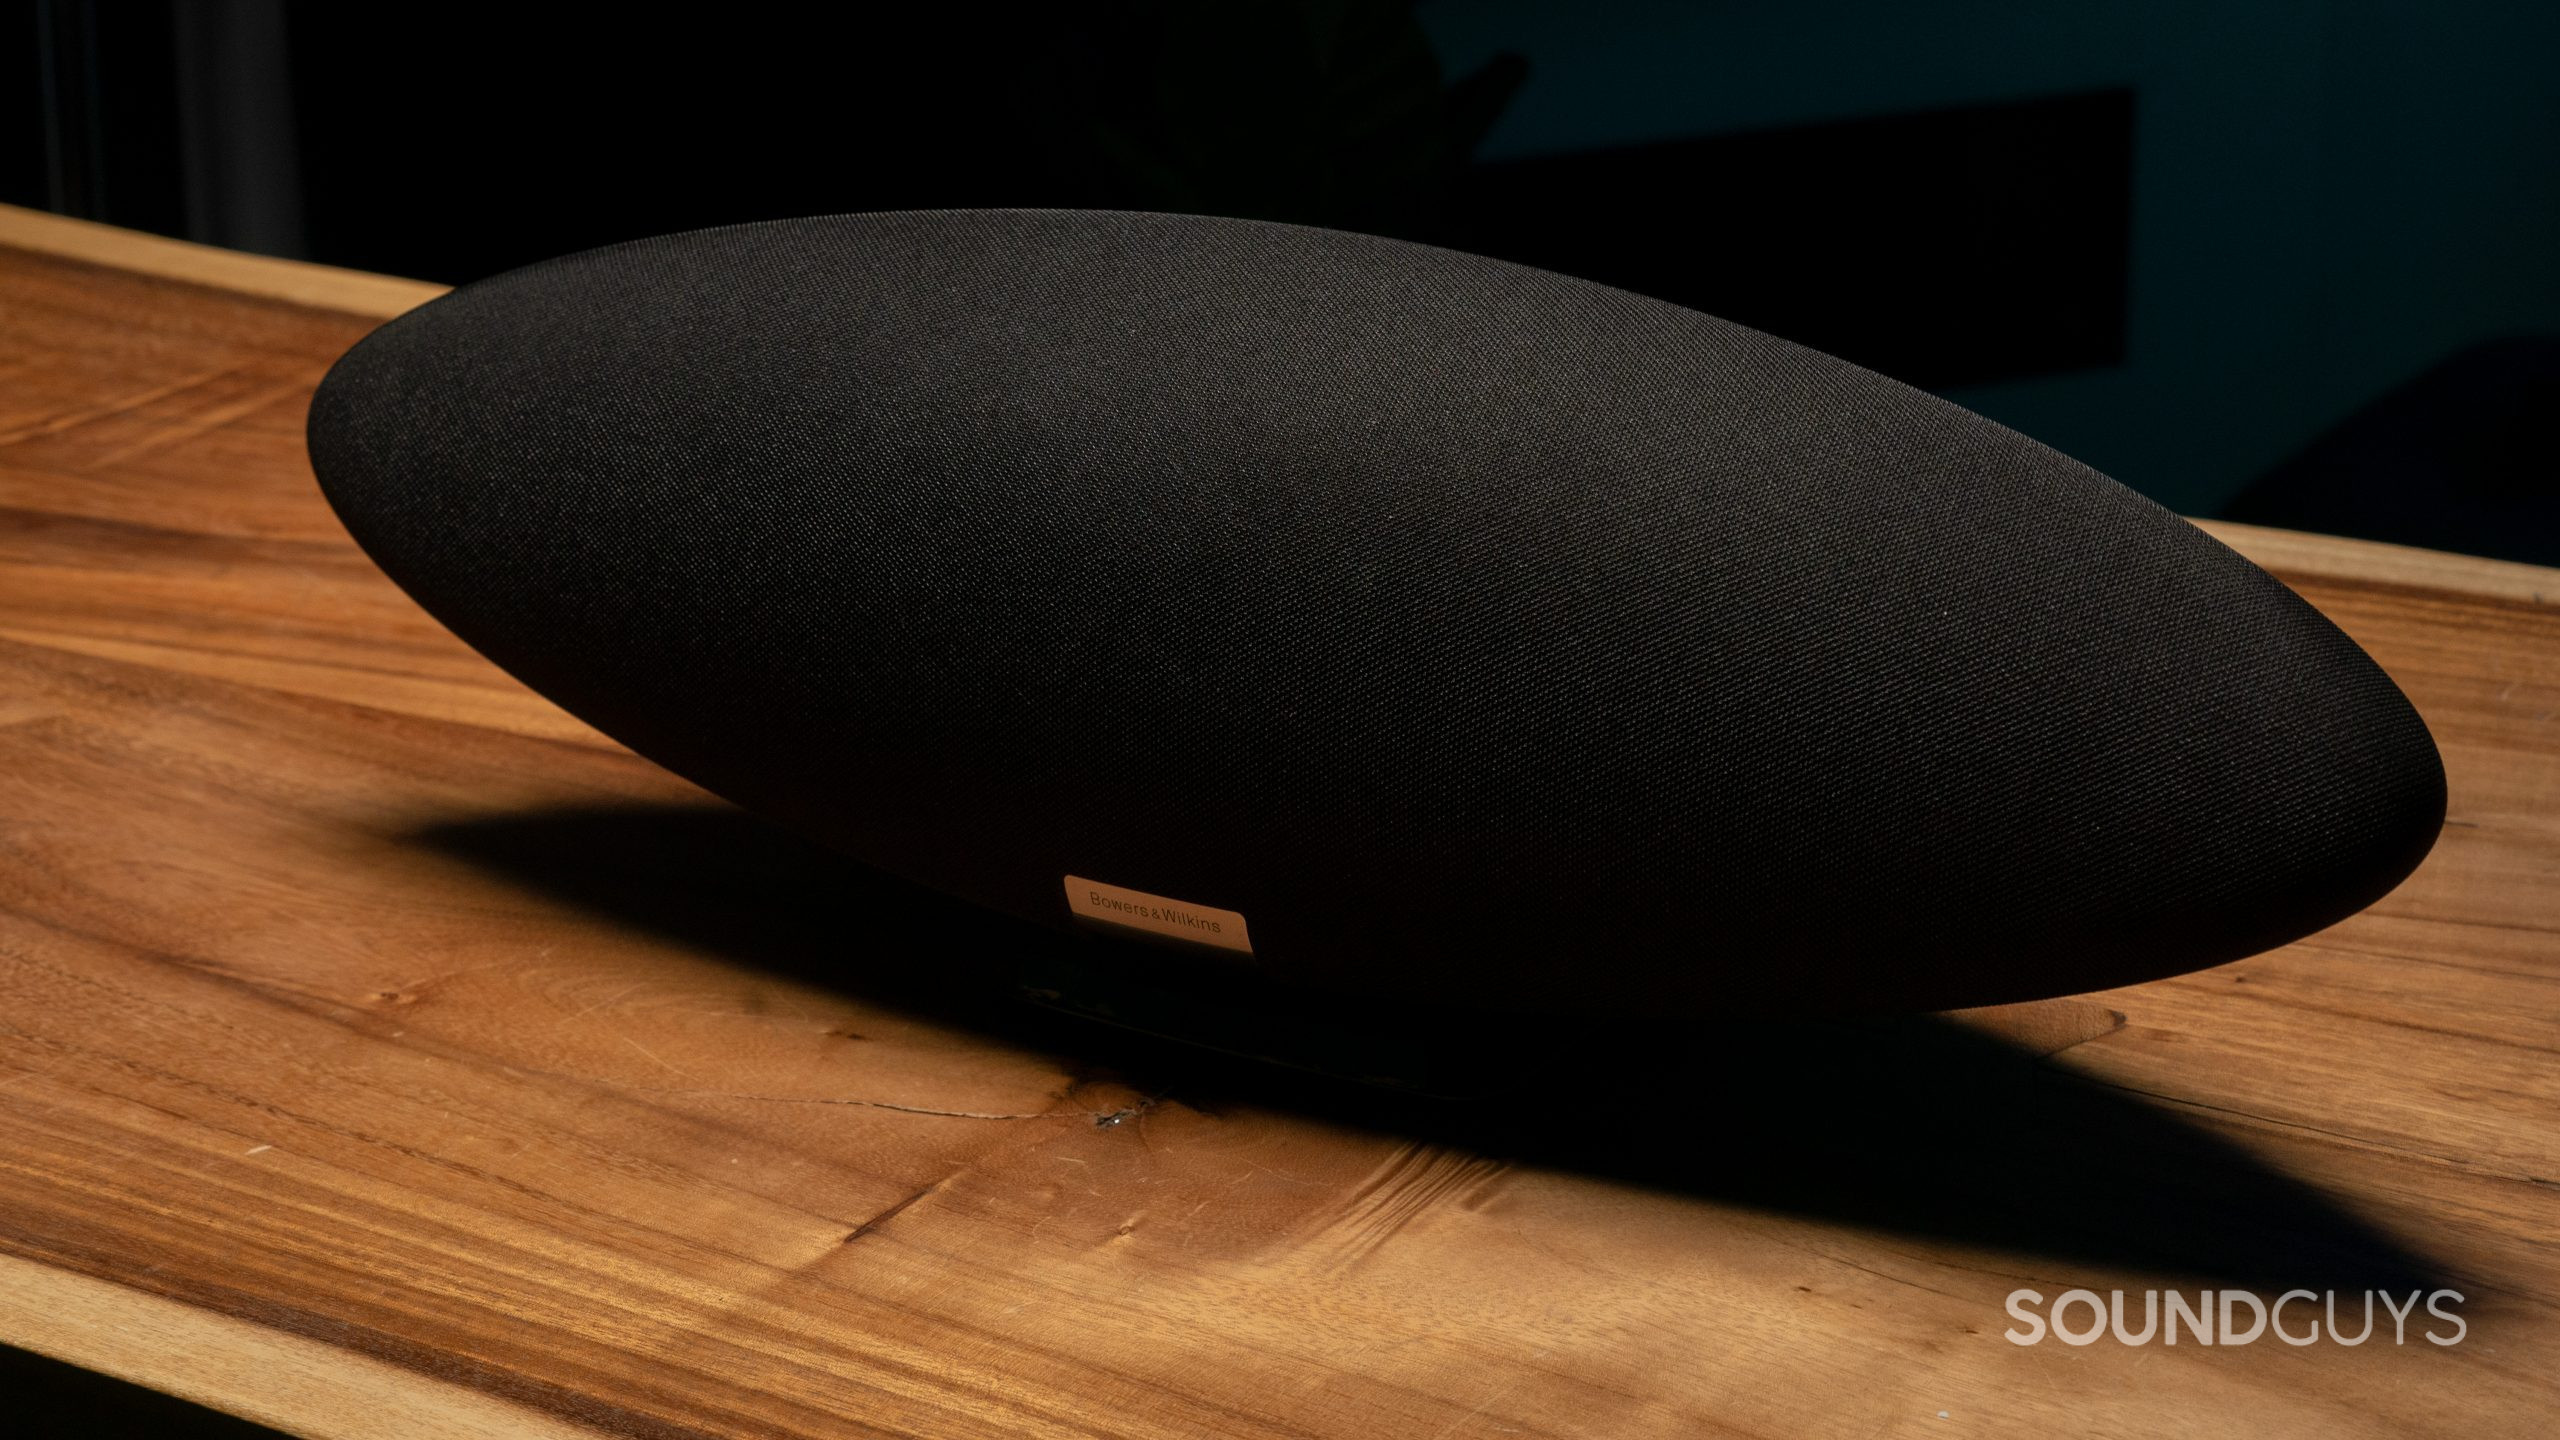 A black Bowers & Wilkins Zeppelin speaker shown at an angle fron the front on a wooden table.